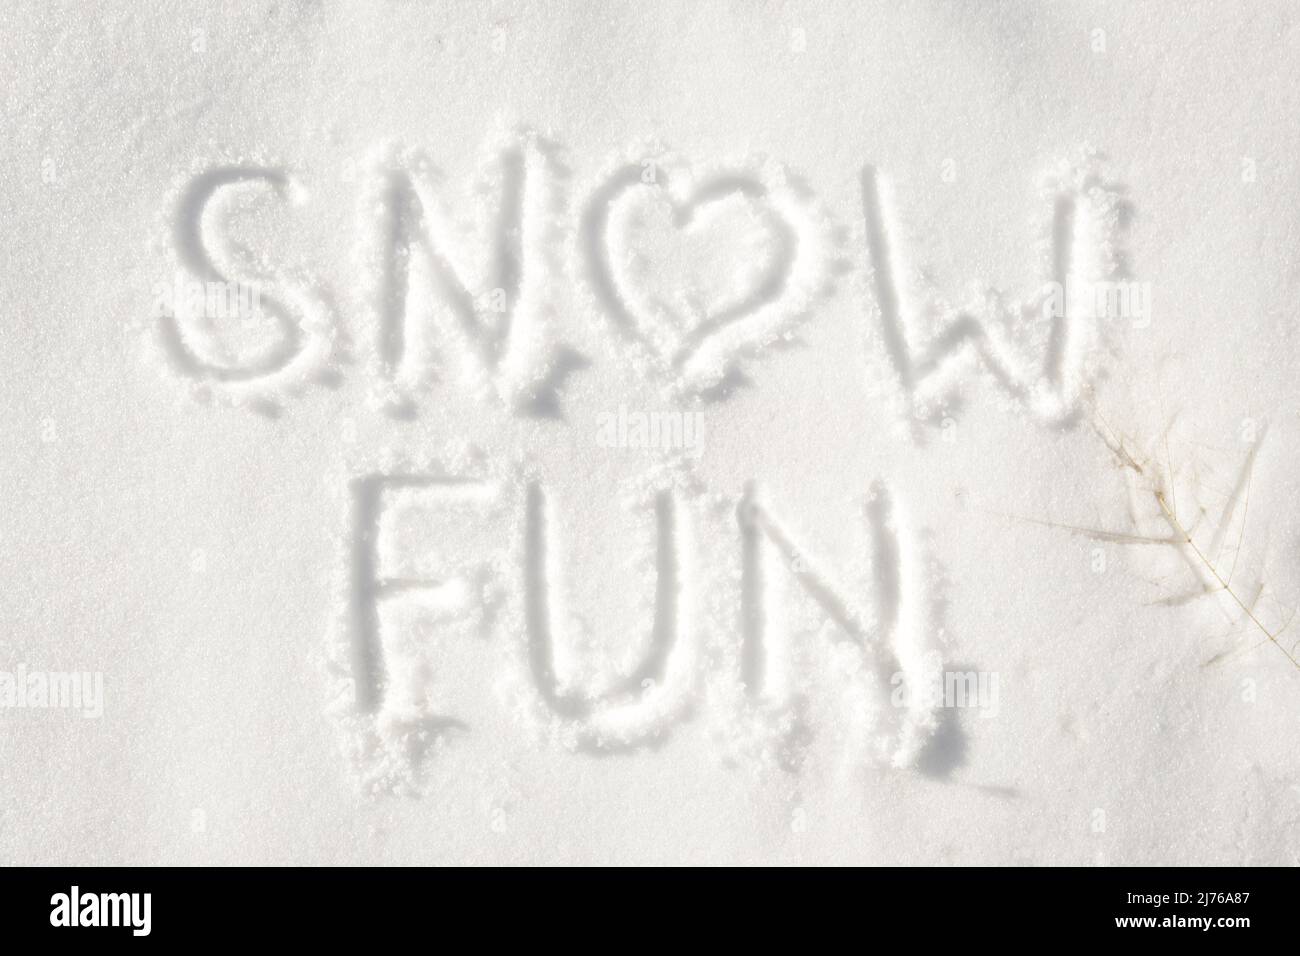 Words 'snow fun' with a heart for letter o written in snow; concept of fun that can be had on a snowy winter day Stock Photo